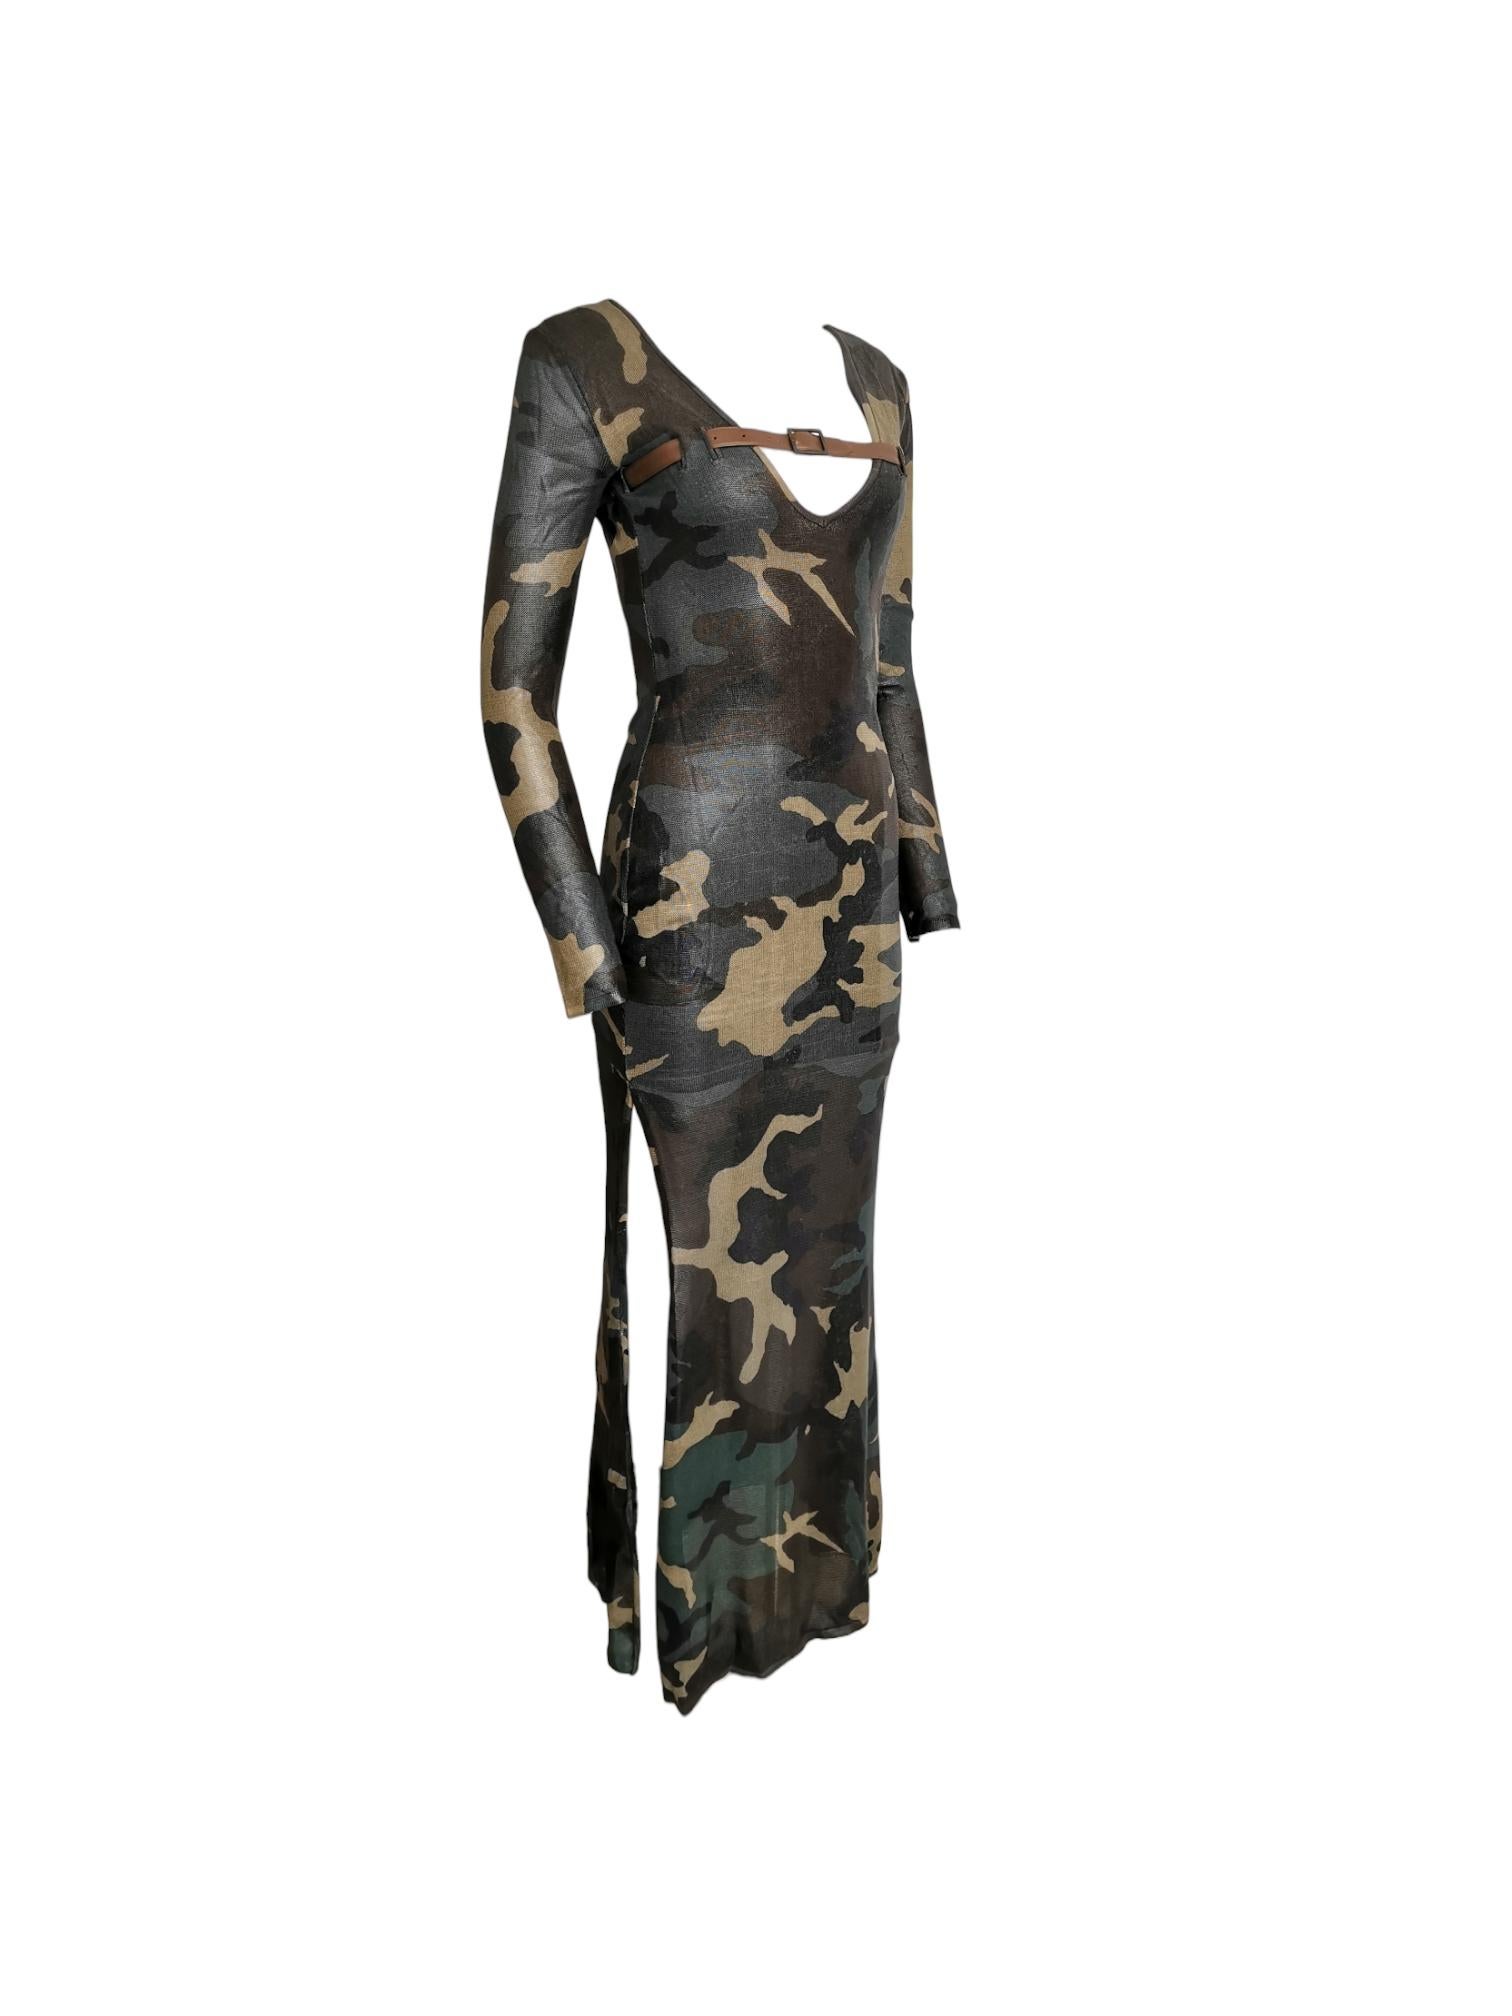 Black Dior camouflage maxi dress, SS 2001 For Sale